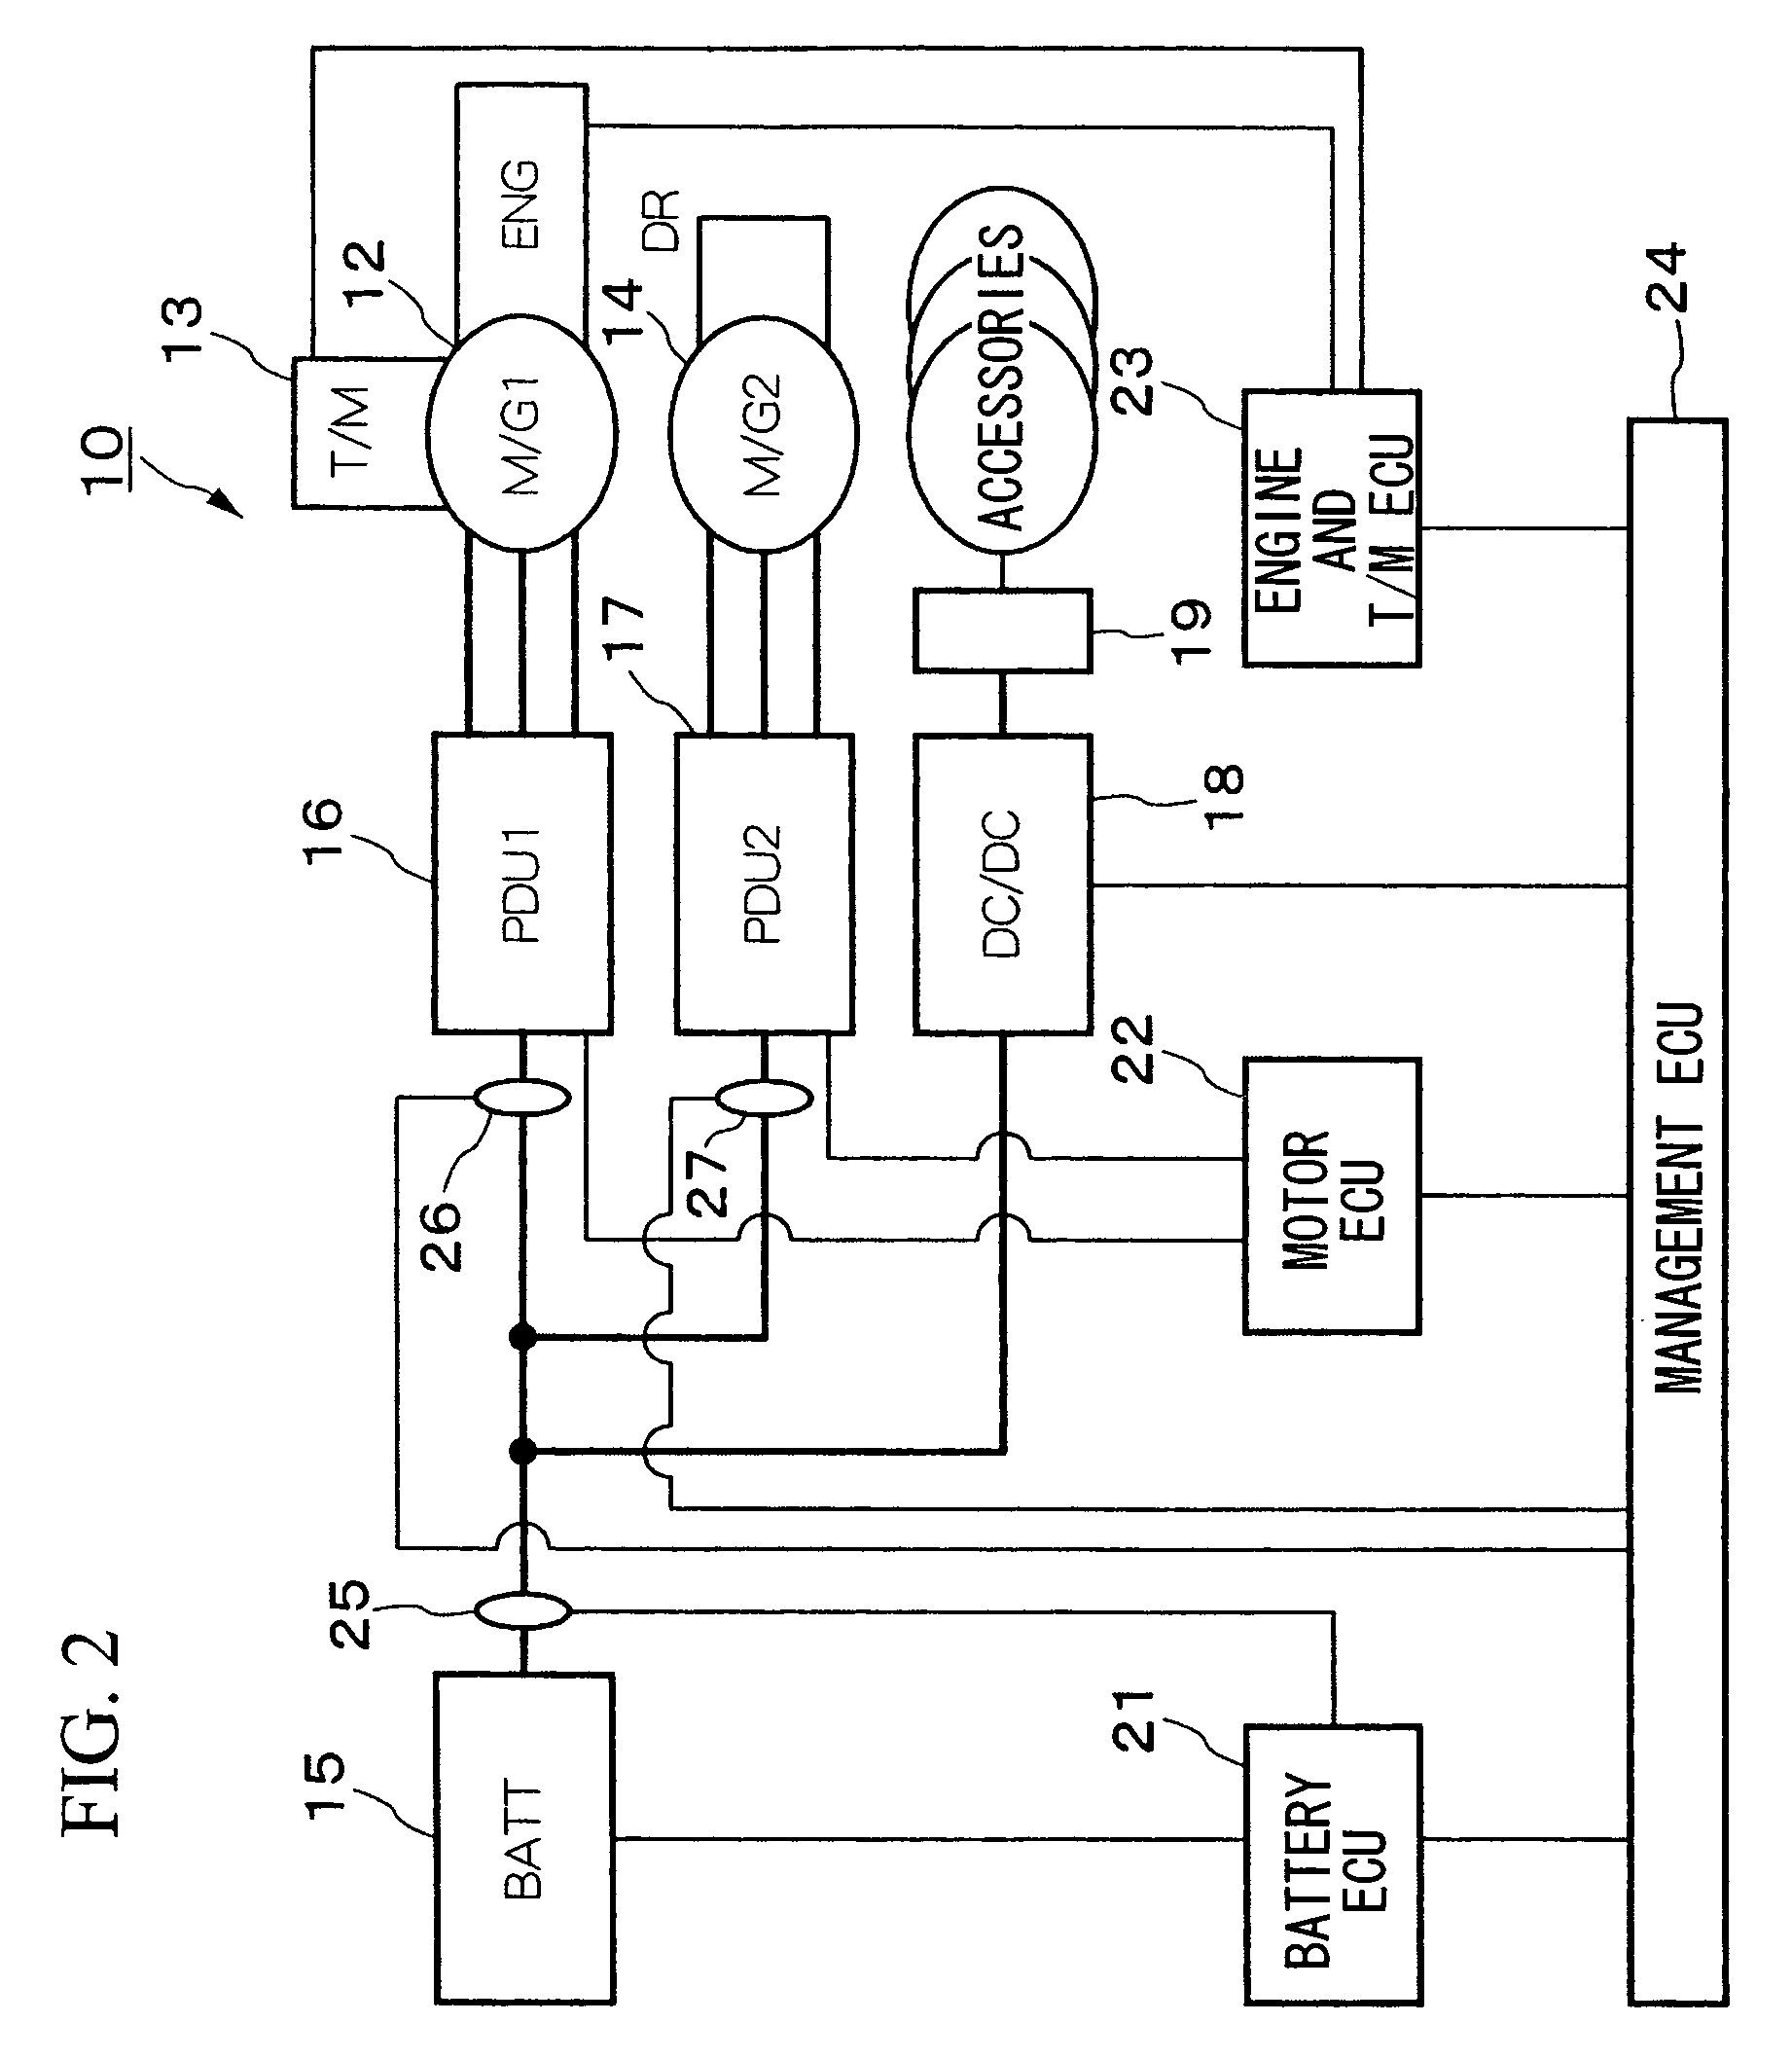 Power control apparatus for hybrid vehicle